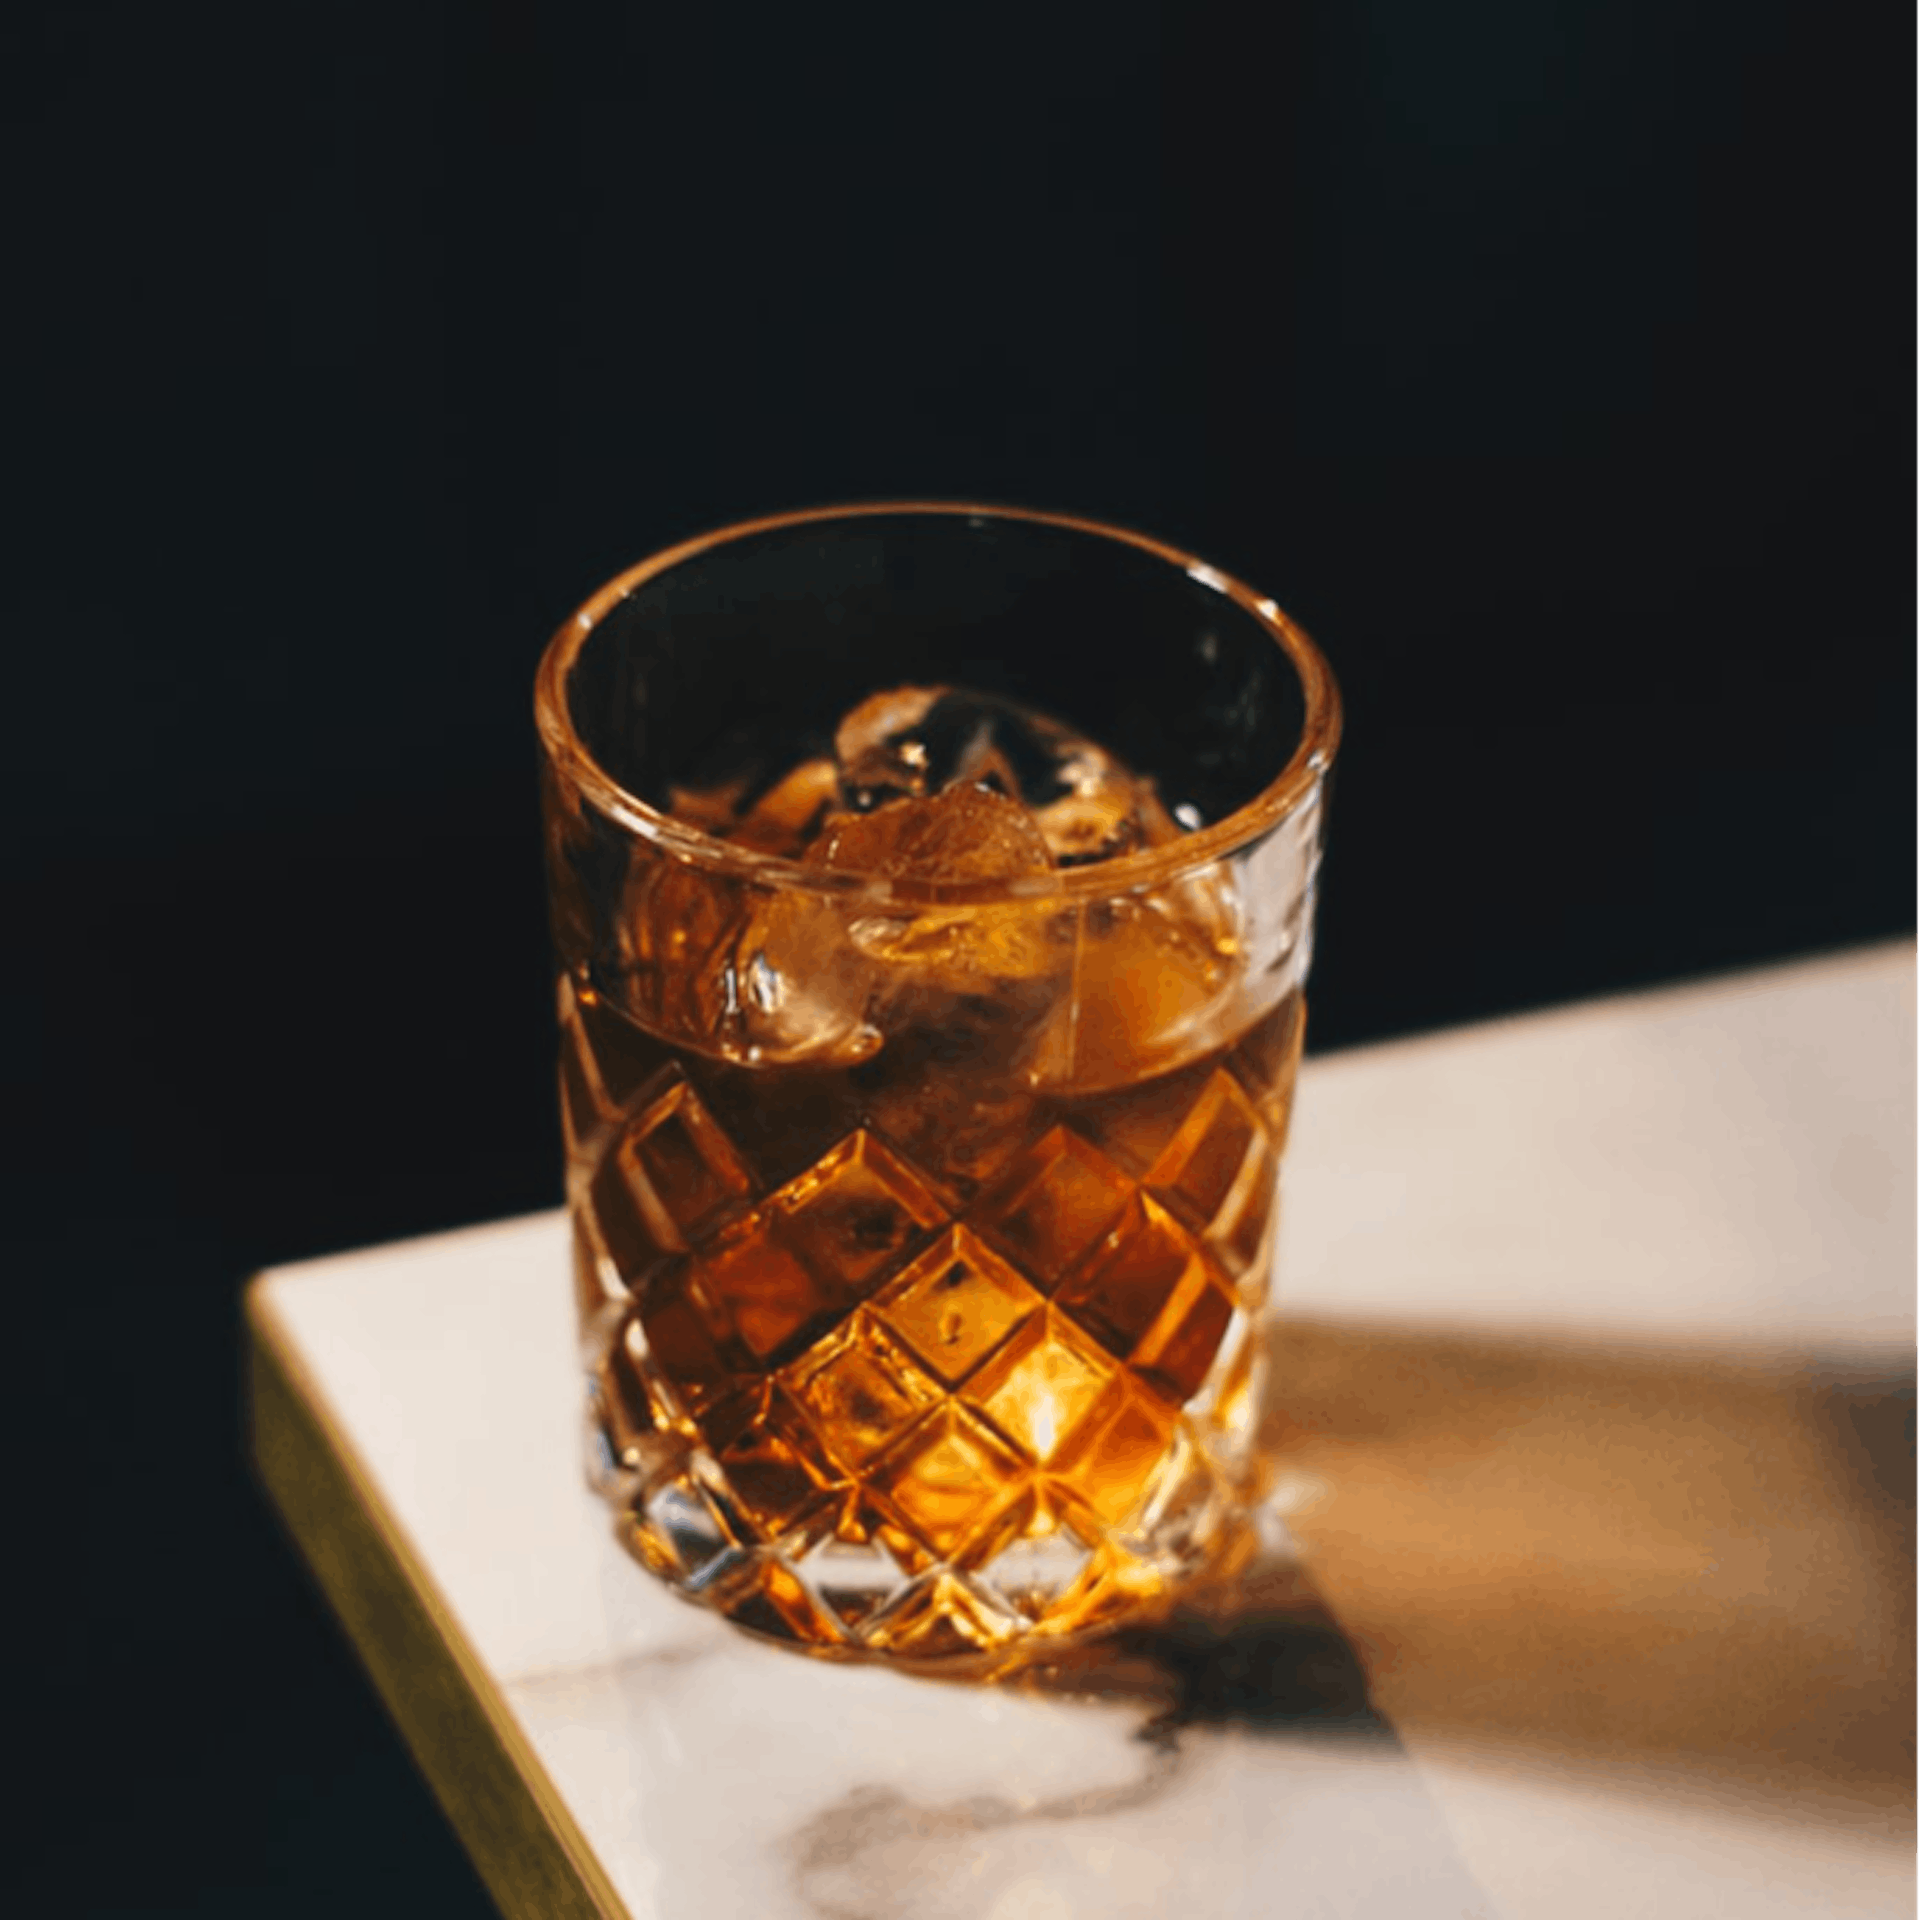 featured image - How Blockchain Technology can Change Whisky Investment